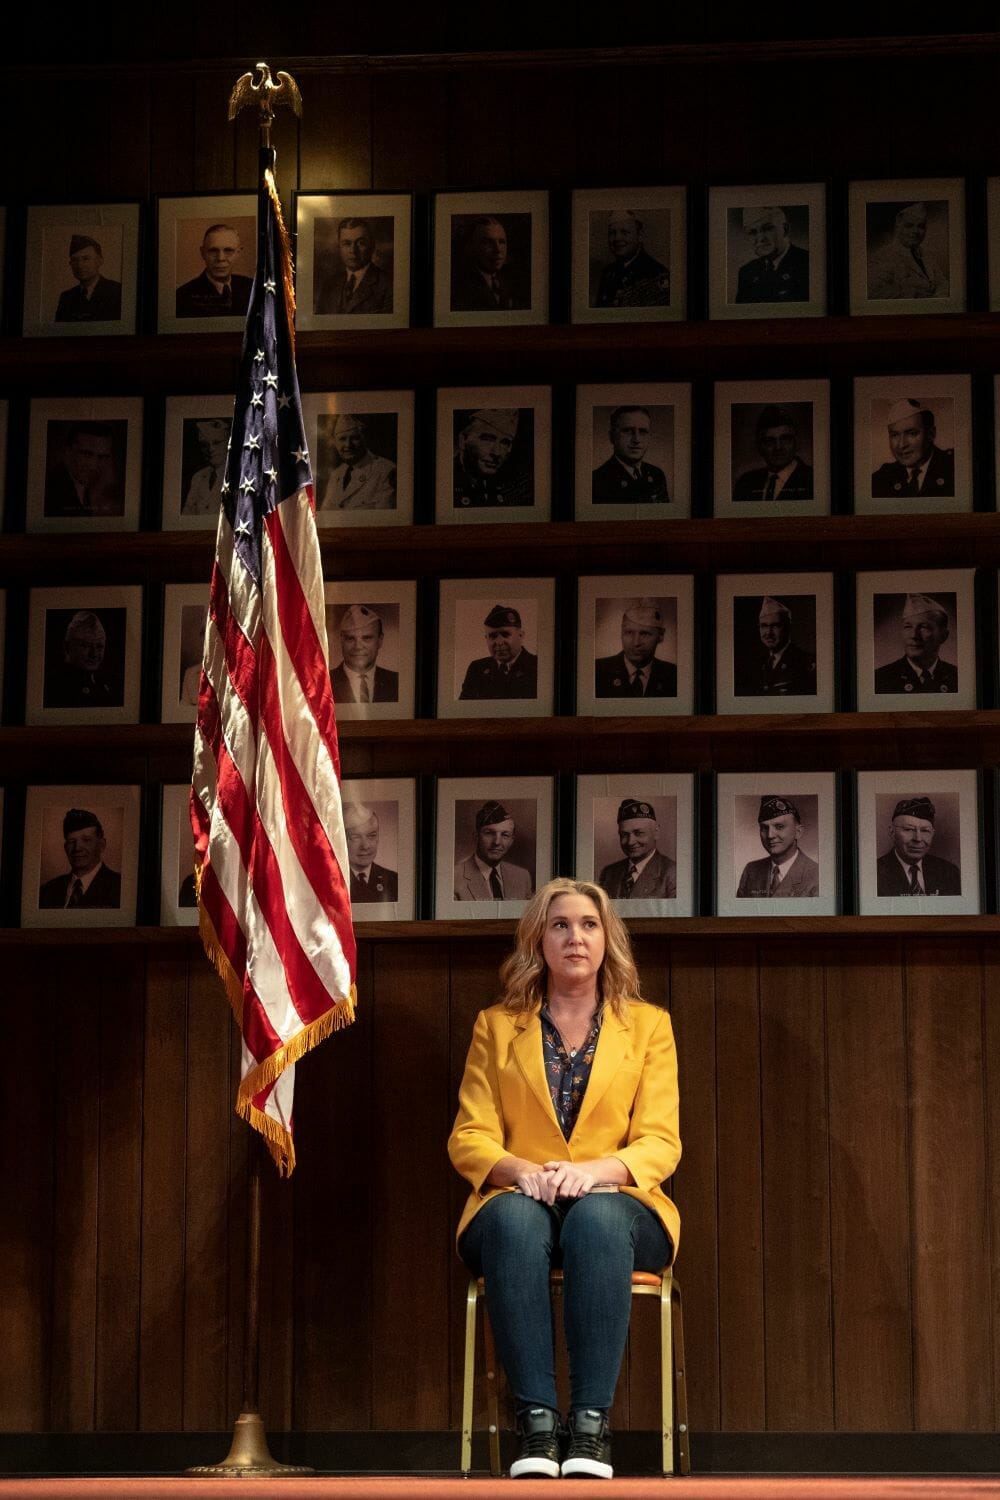 Broadway Playhouse WHAT THE CONSTITUTION MEANS TO ME